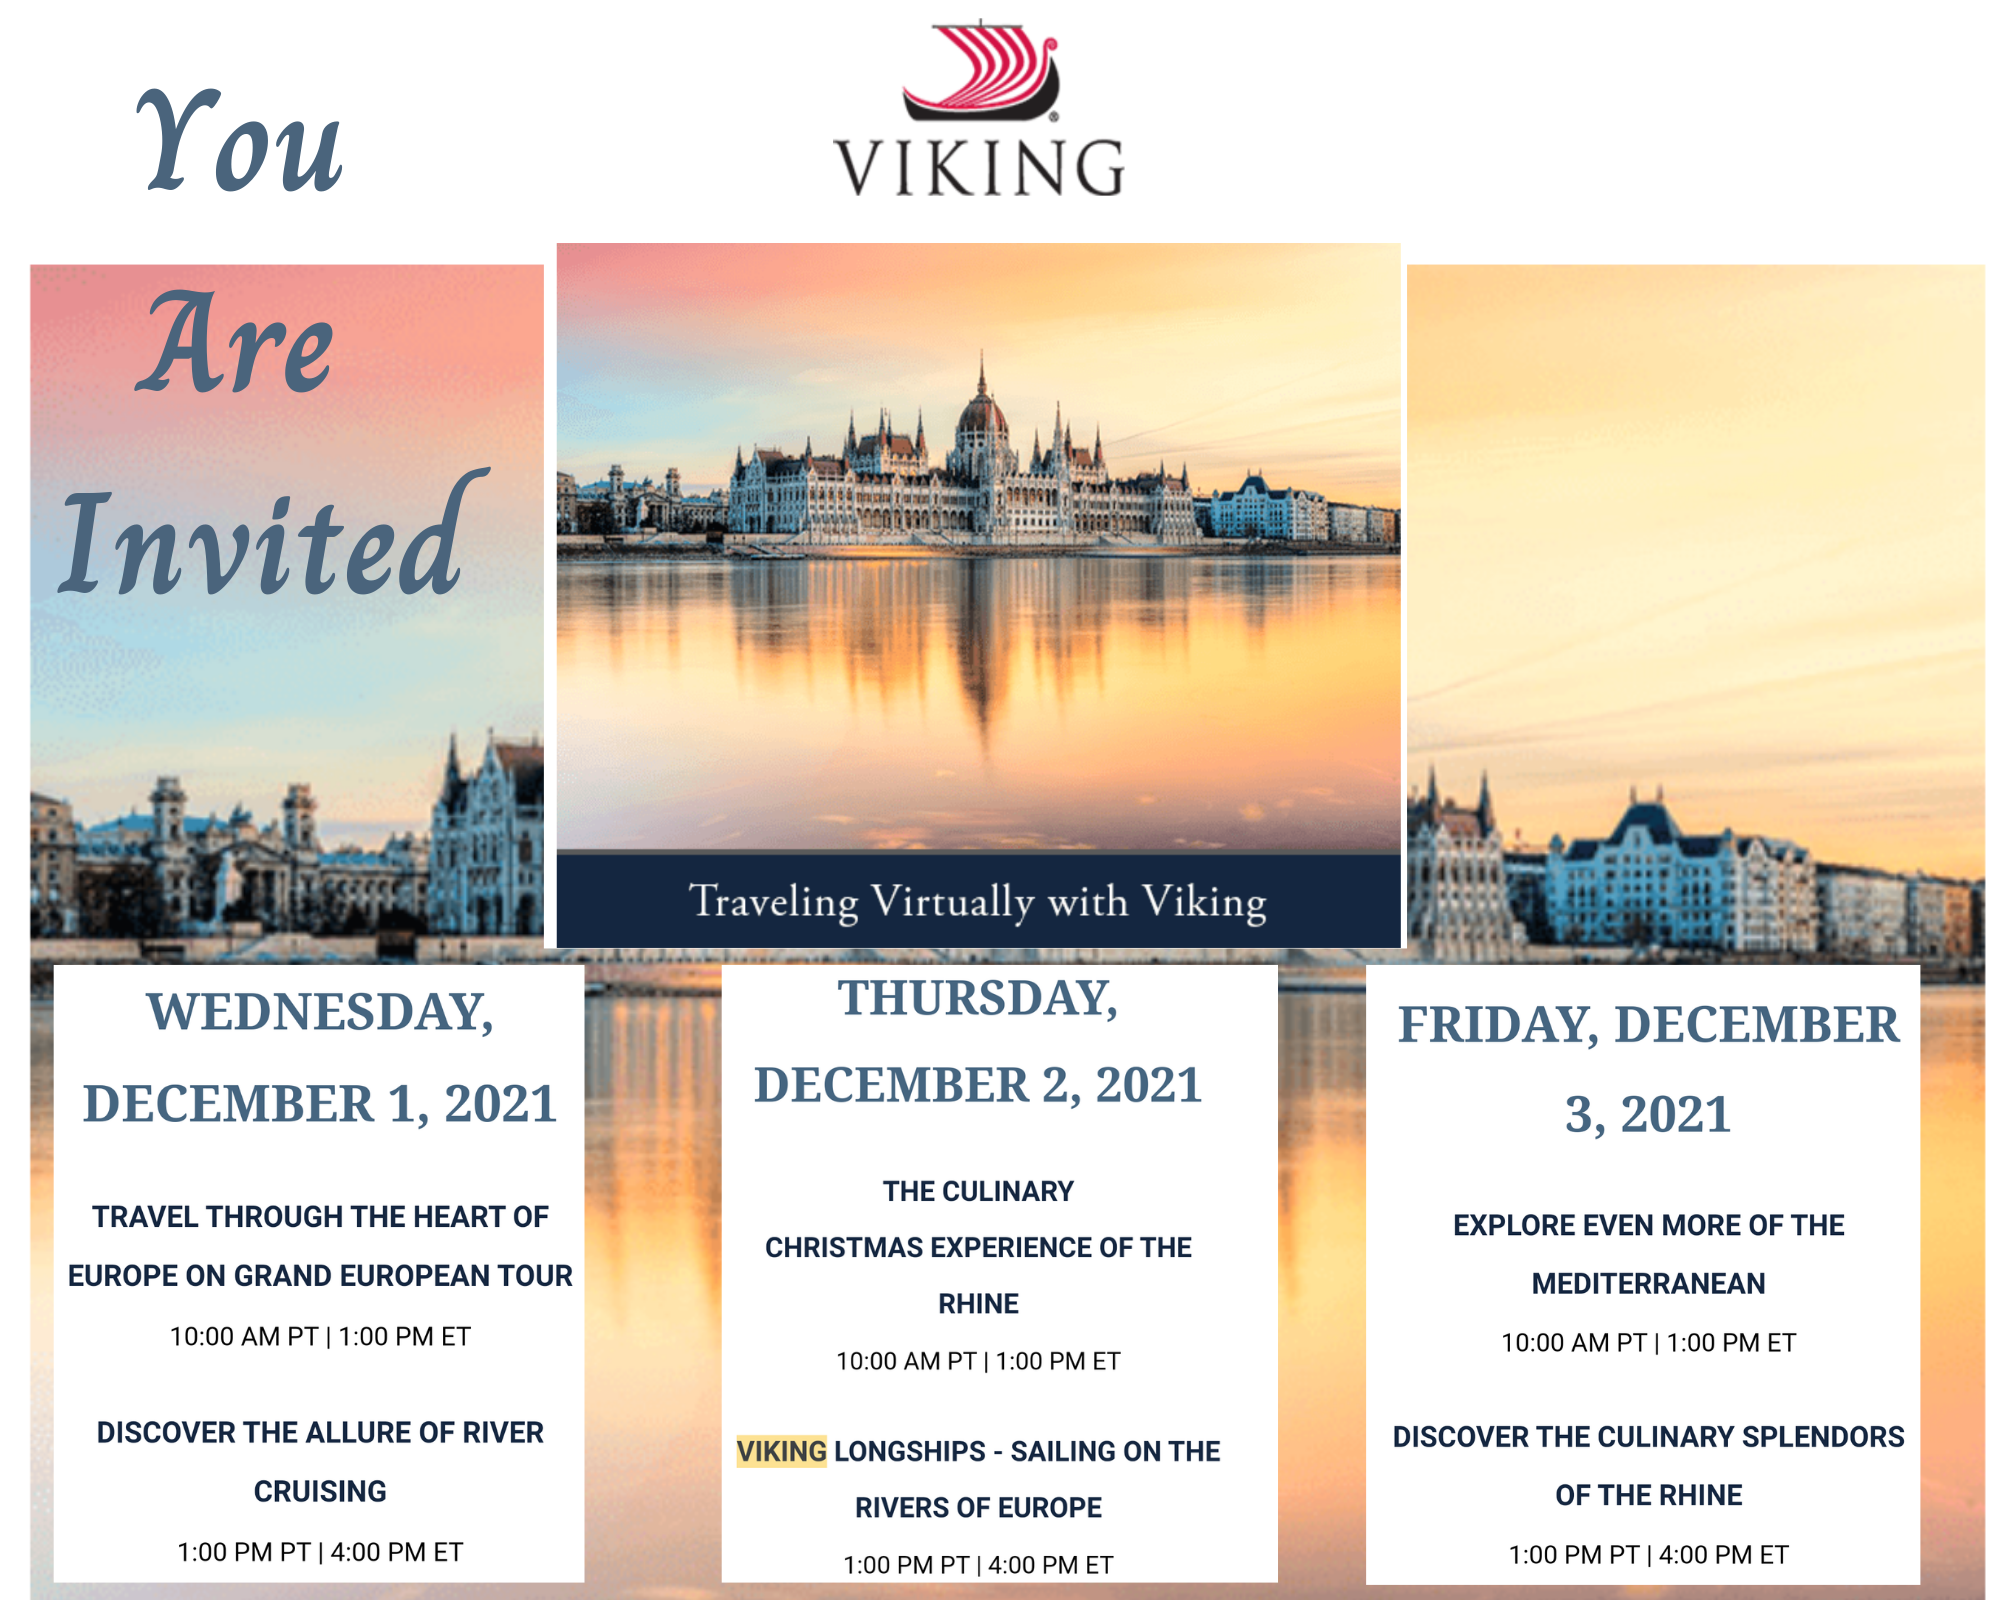 Travel virtually with Viking    December 1 – 3, 2021, Online Event